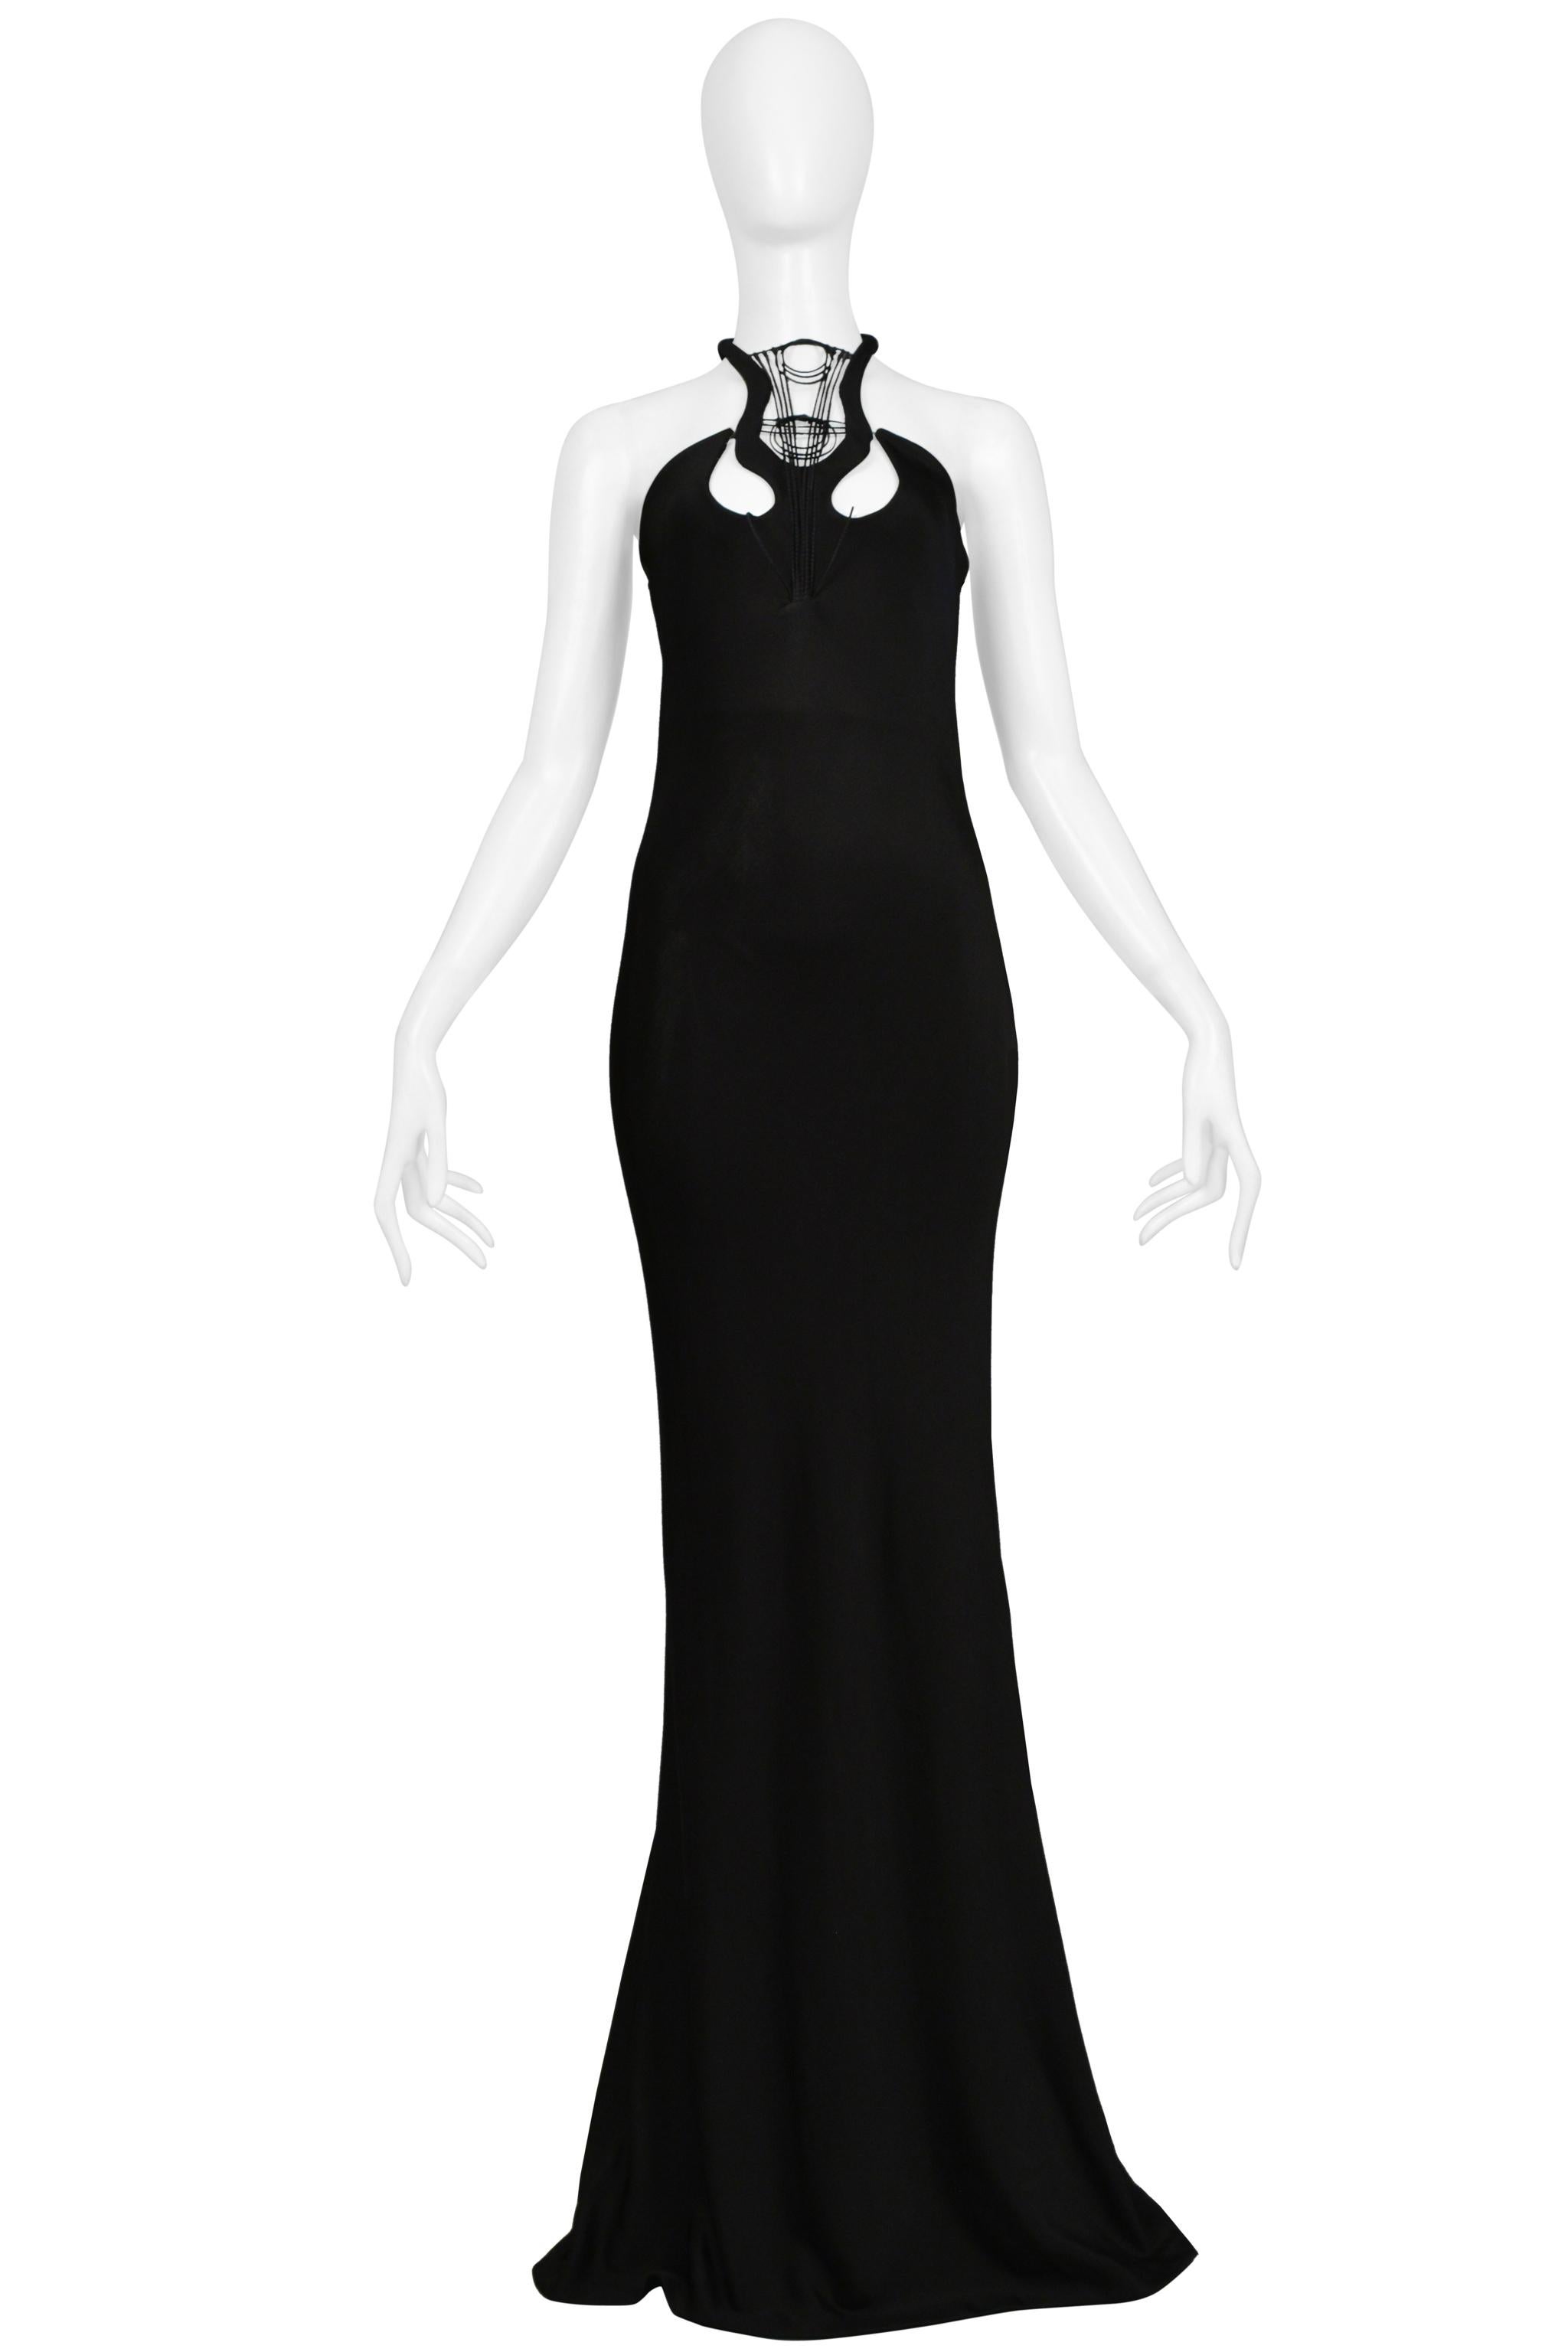 Sophia Kokosalaki Black Architectural Evening Gown With Intricate Bodice 2008 In Excellent Condition For Sale In Los Angeles, CA